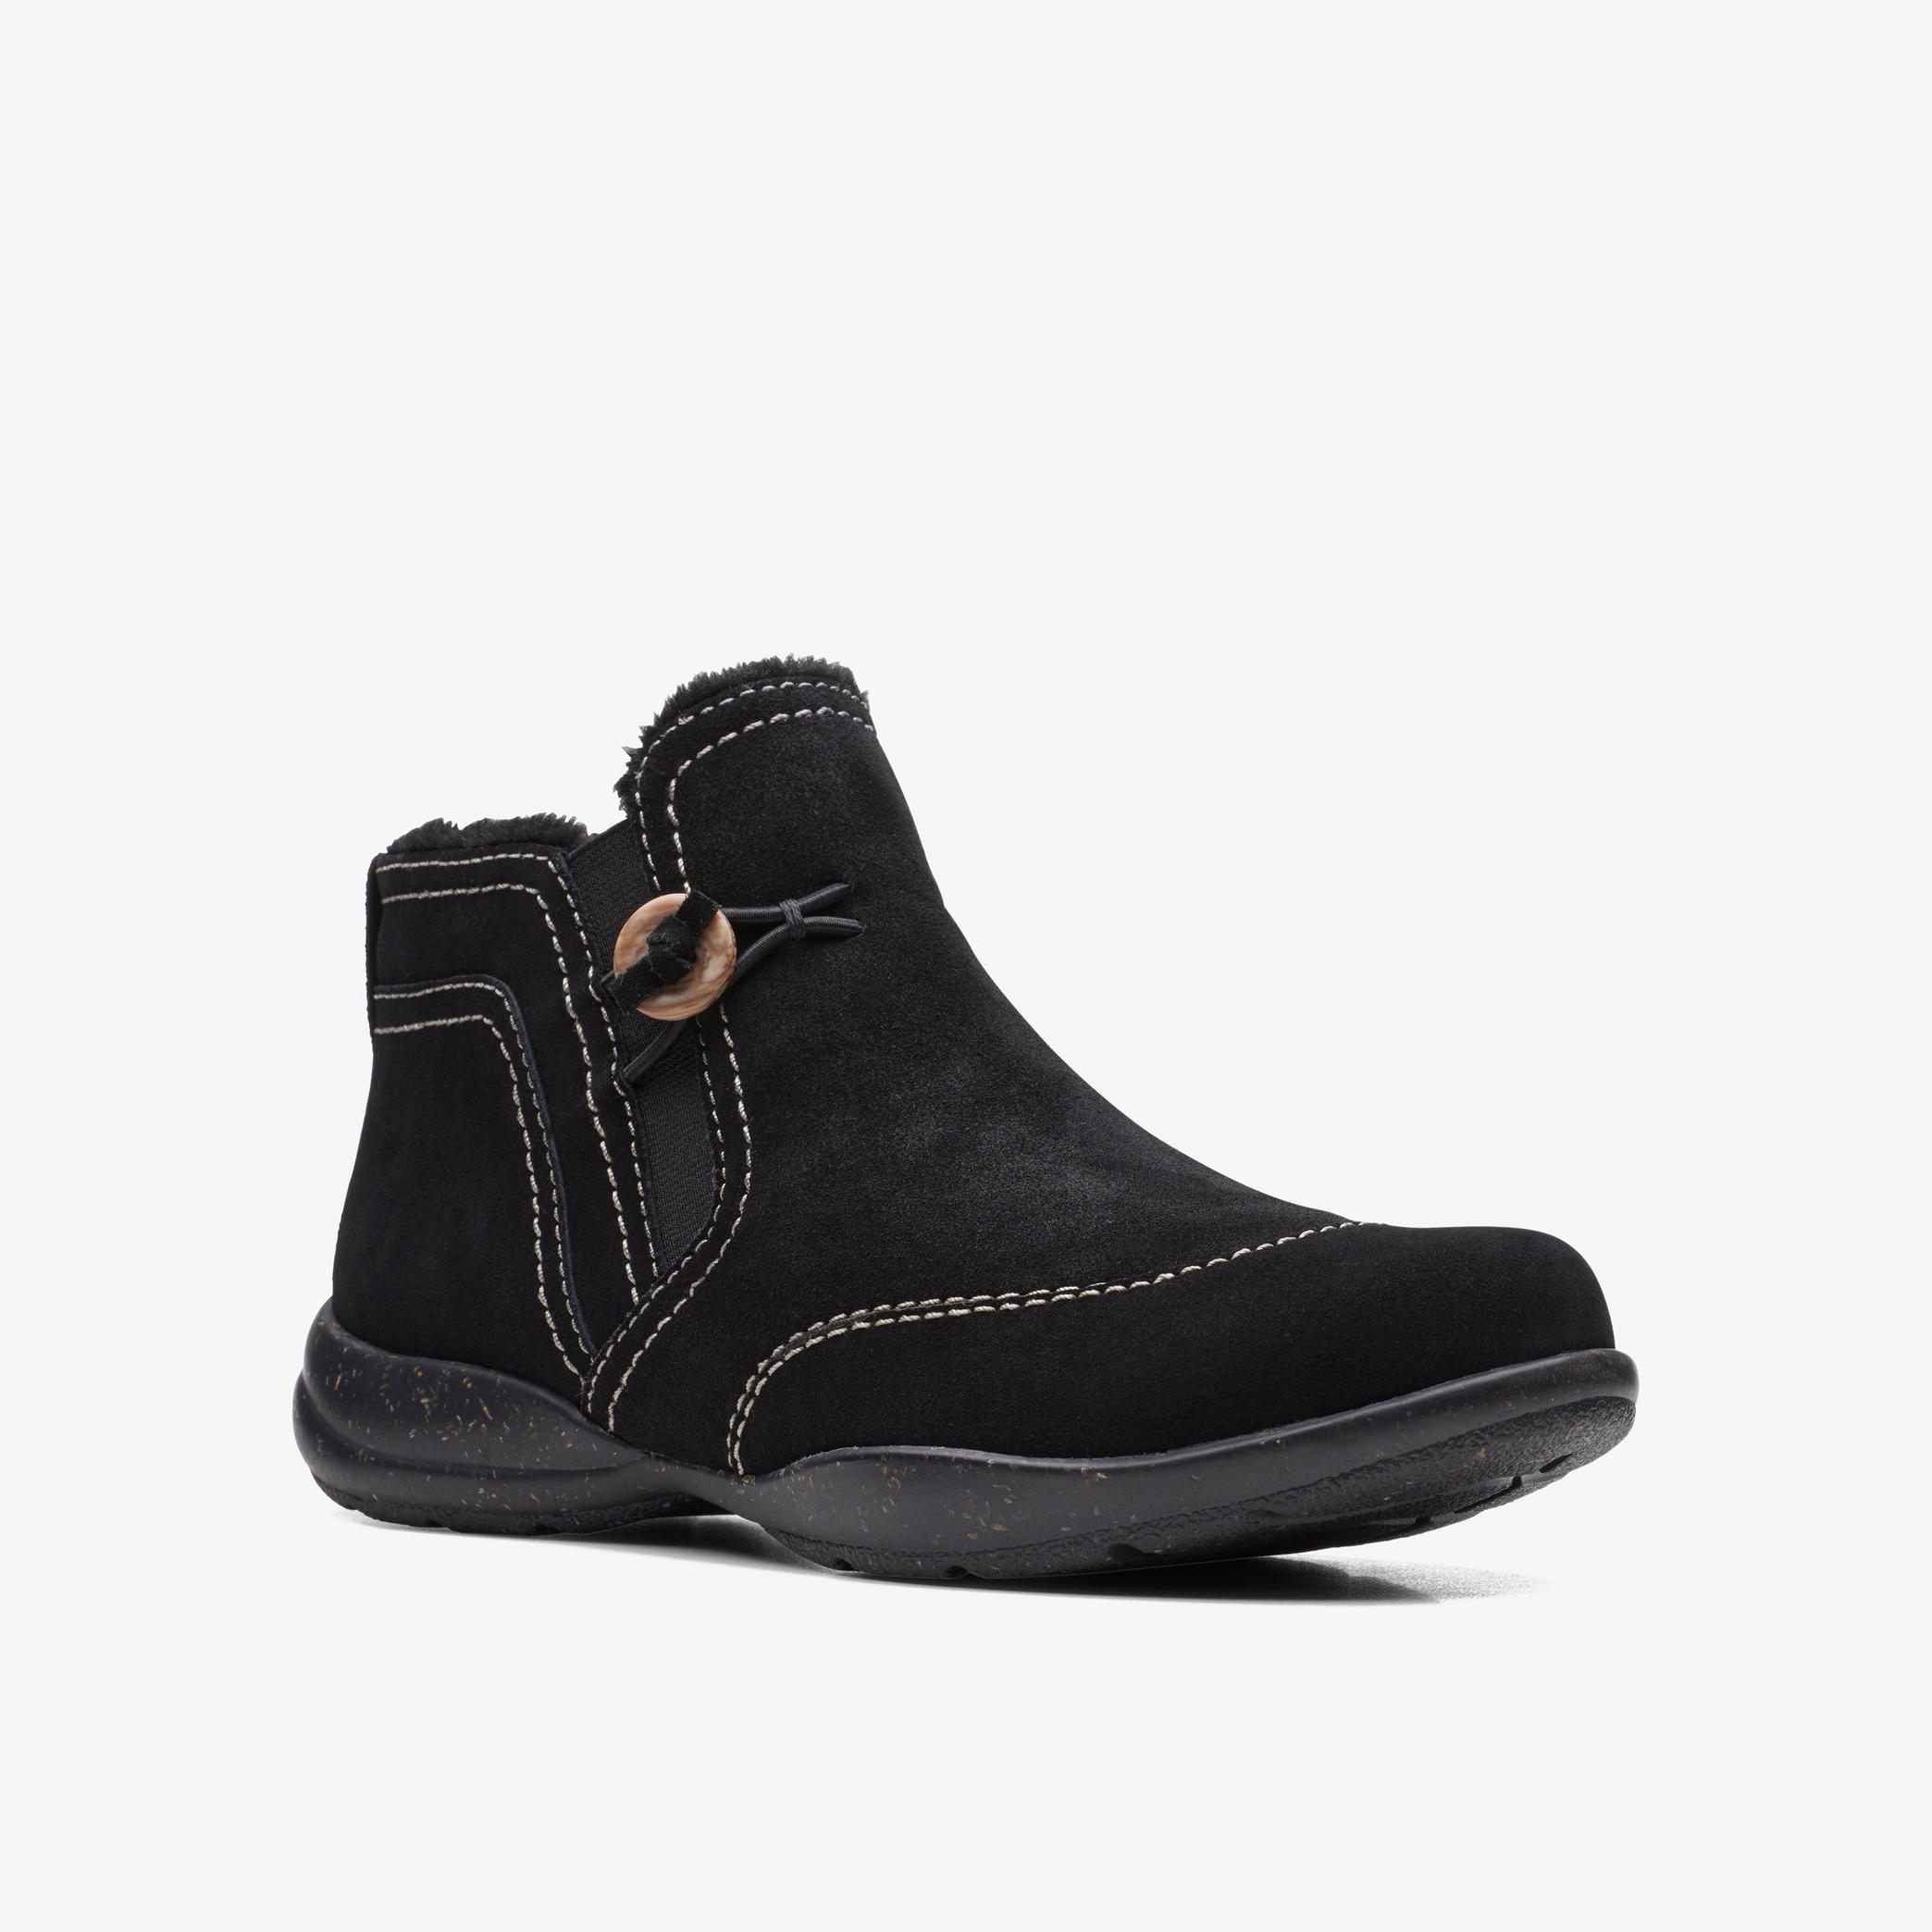 Roseville Aster Black Suede Ankle Boots, view 3 of 6